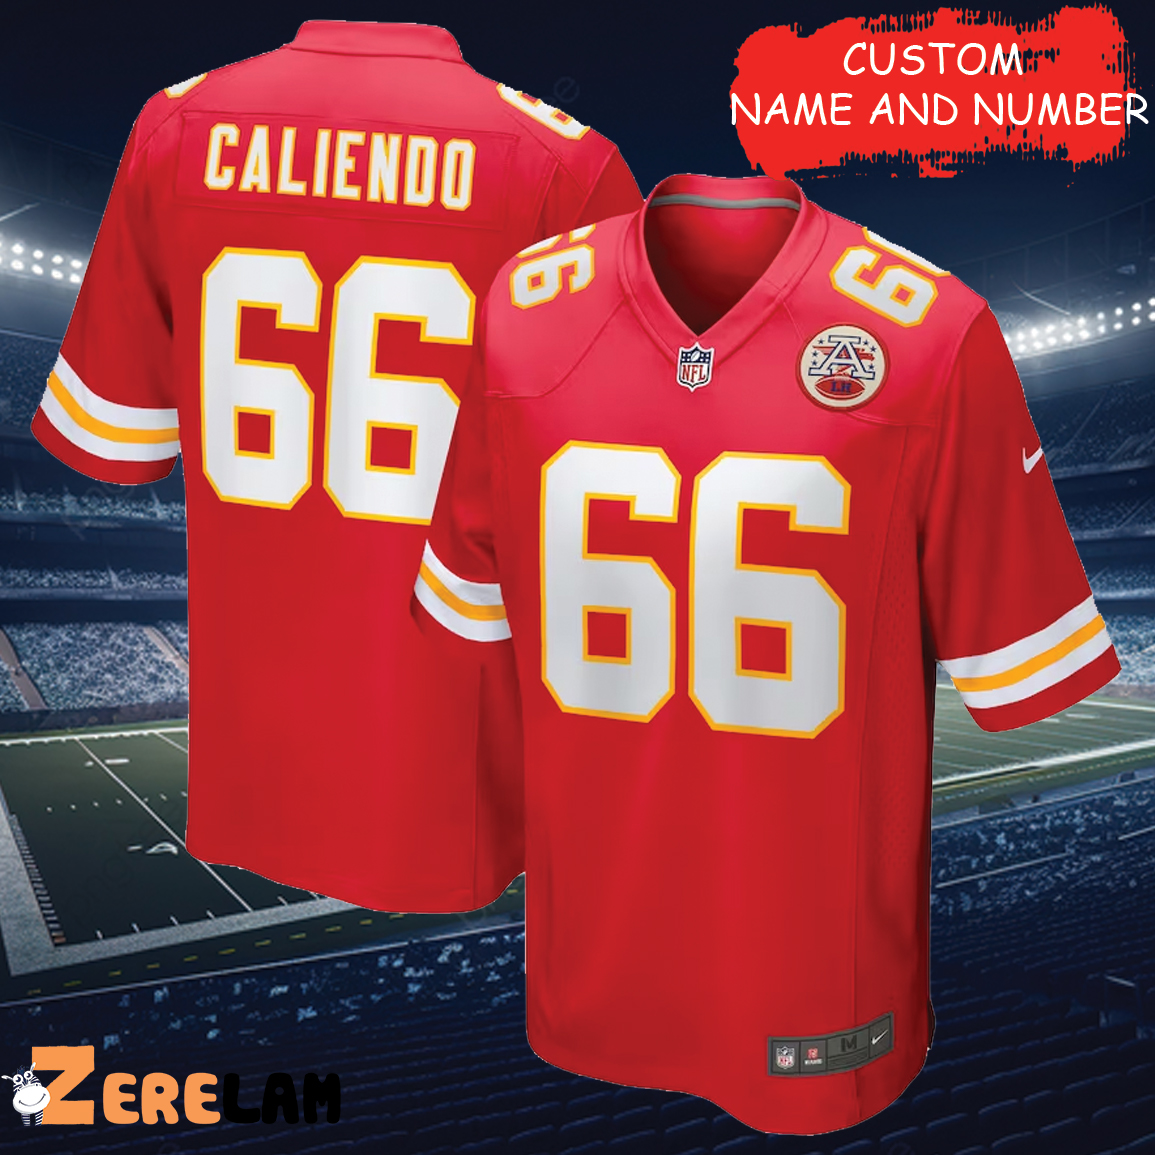 Caliendo Mike home jersey